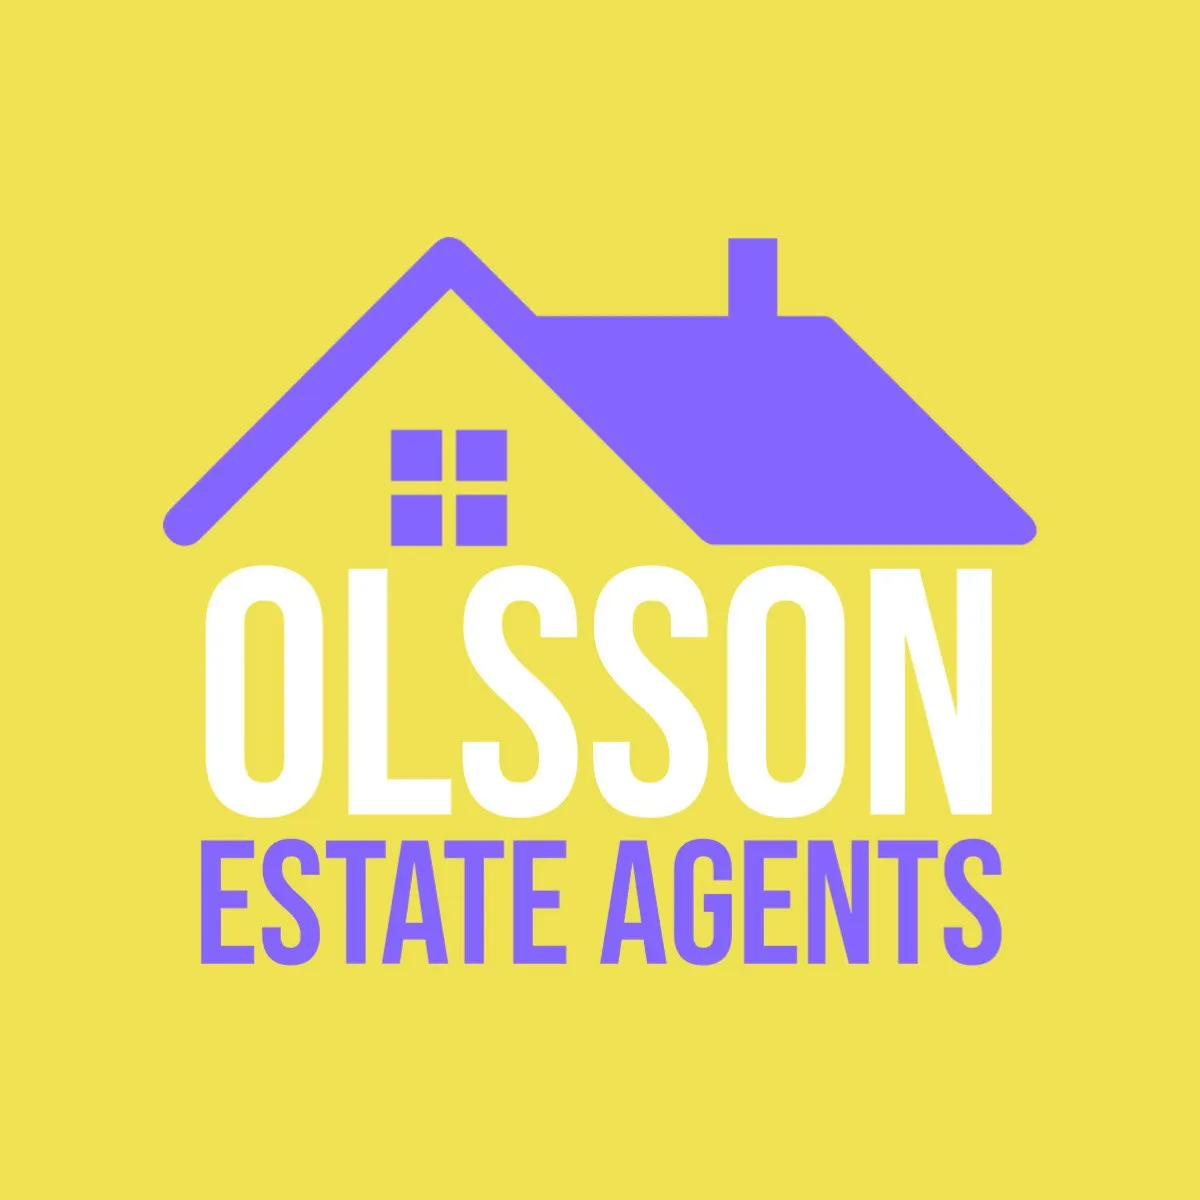 Yellow And Purple Roof Estate Agents Logo